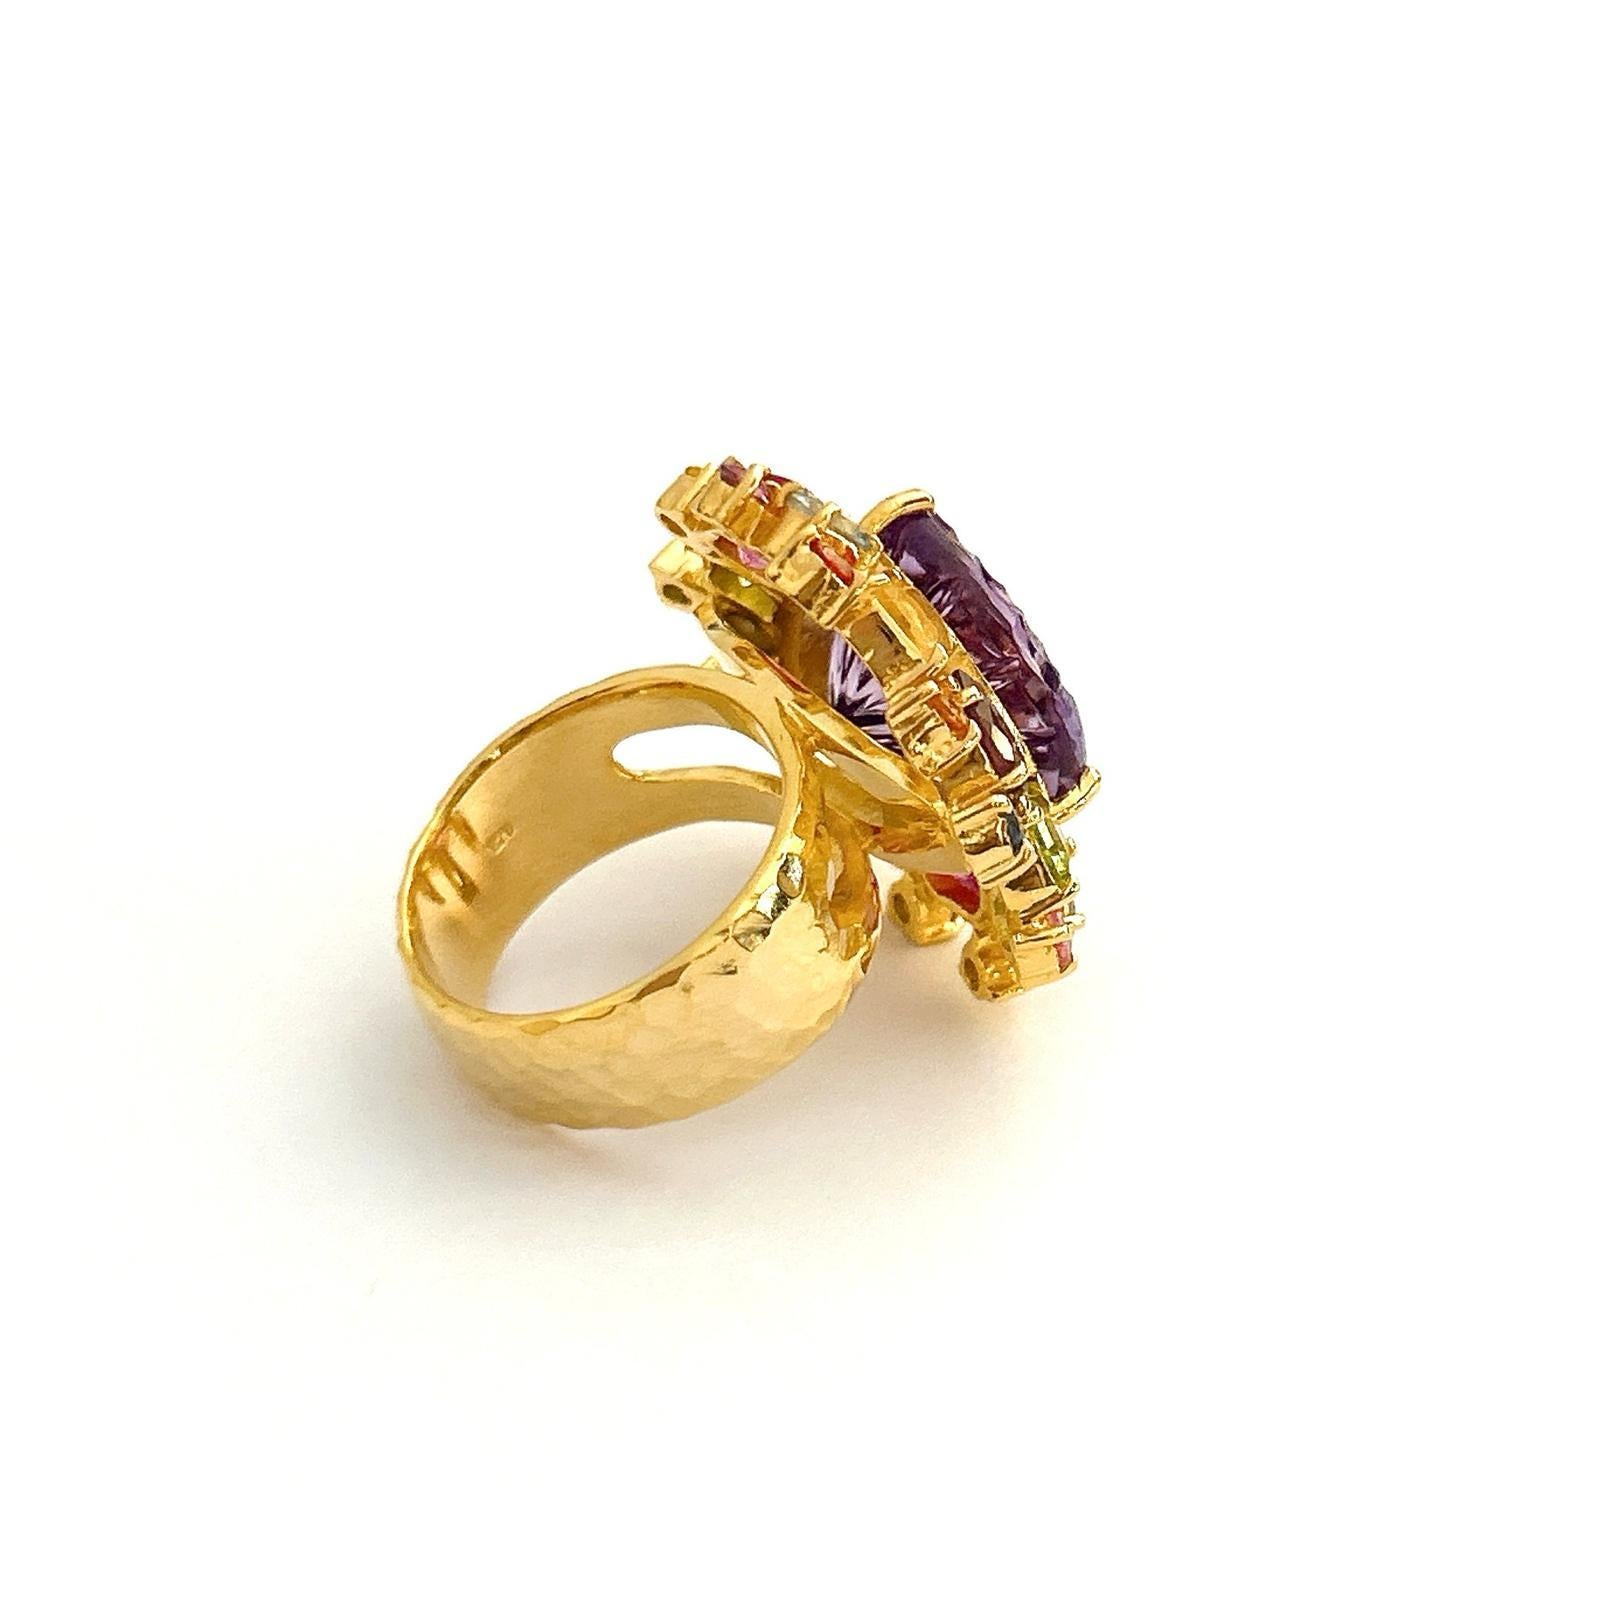 Bochic “Orient” Candy Amethyst & Multi Gem Cocktai Ring Set In 18k Gold & Silver In New Condition For Sale In New York, NY